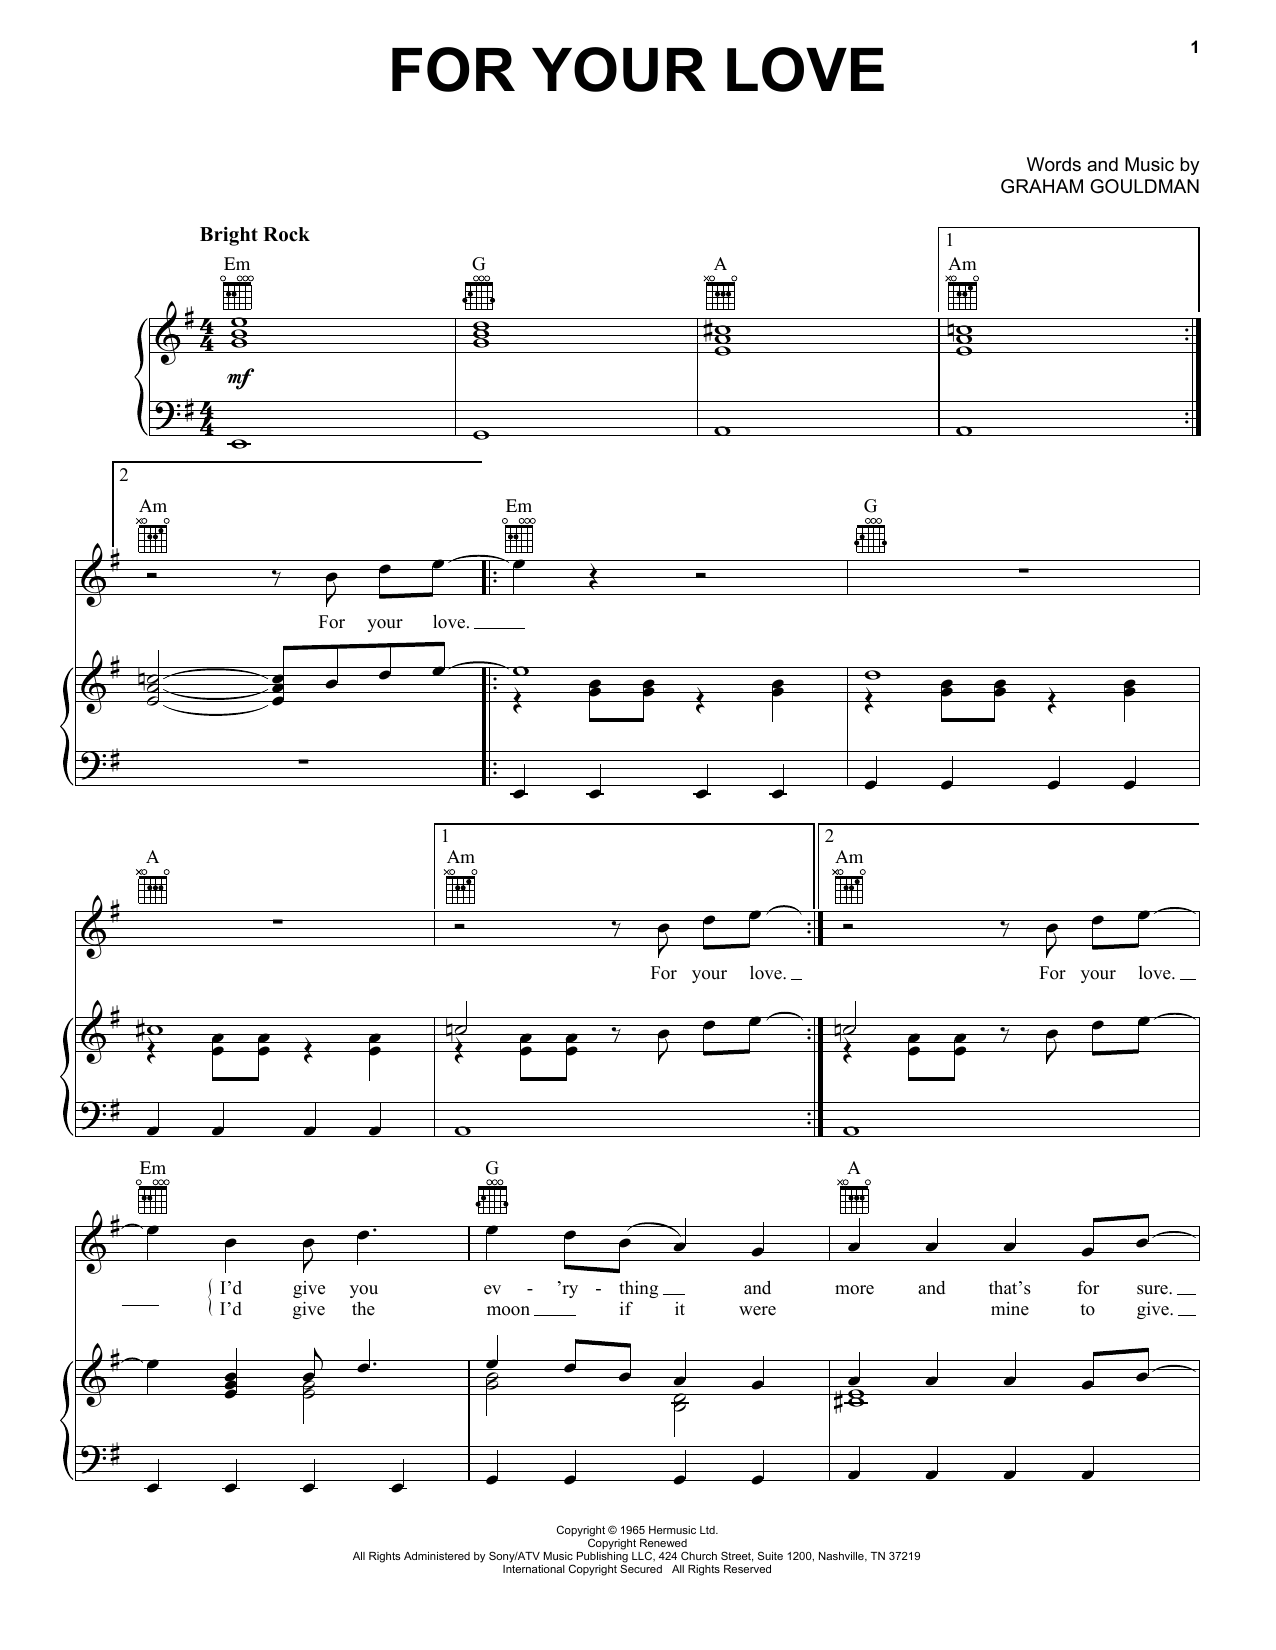 Download The Yardbirds For Your Love Sheet Music